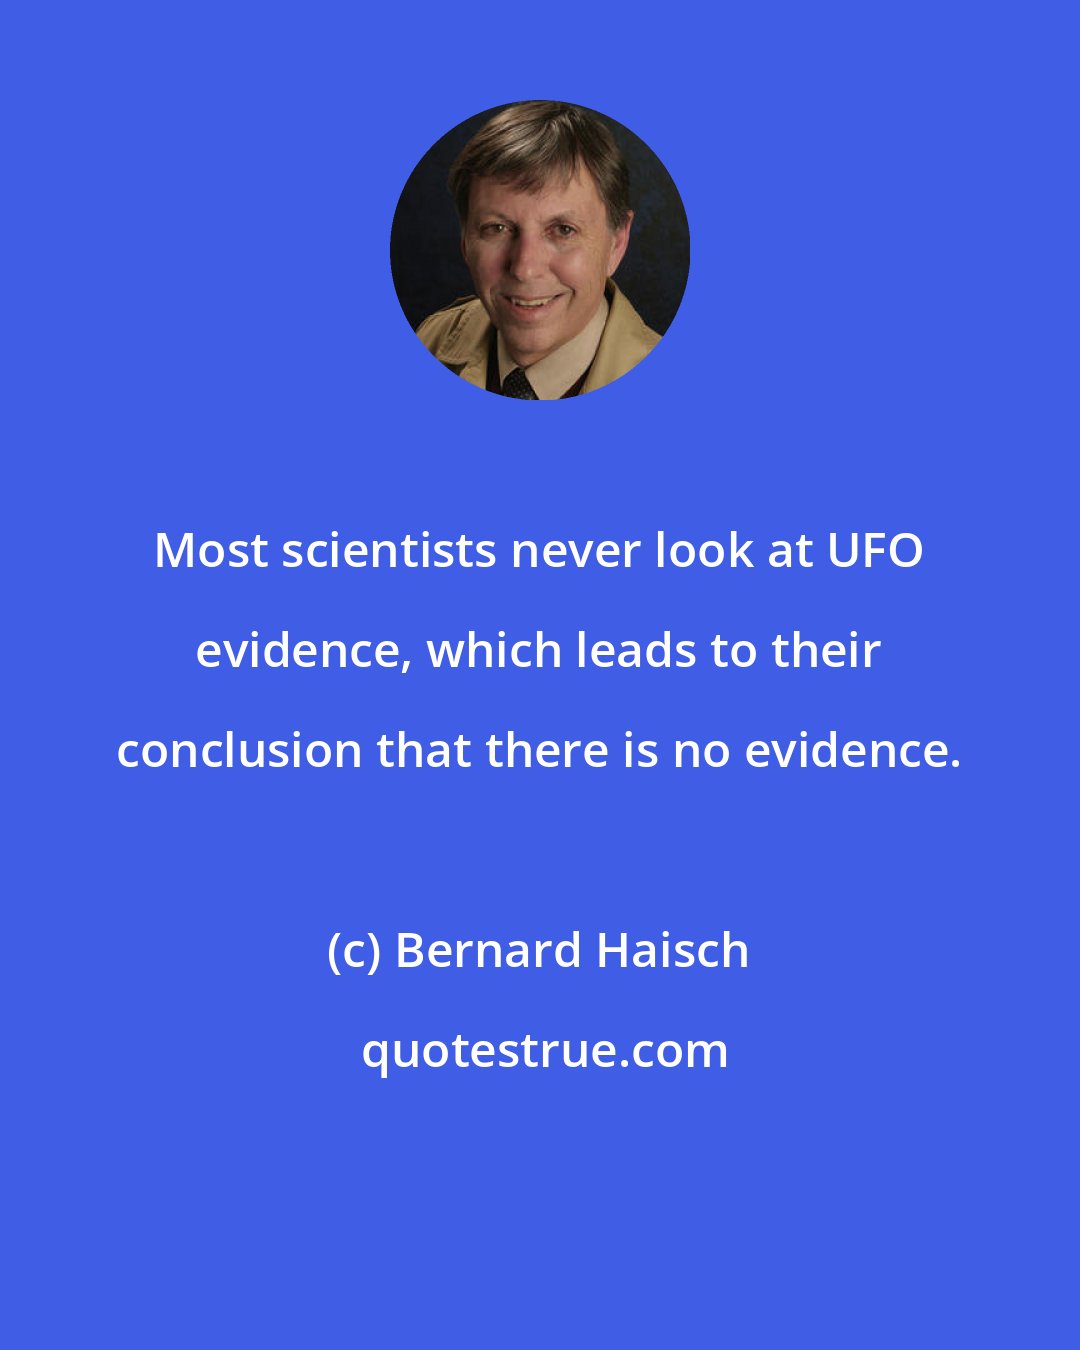 Bernard Haisch: Most scientists never look at UFO evidence, which leads to their conclusion that there is no evidence.